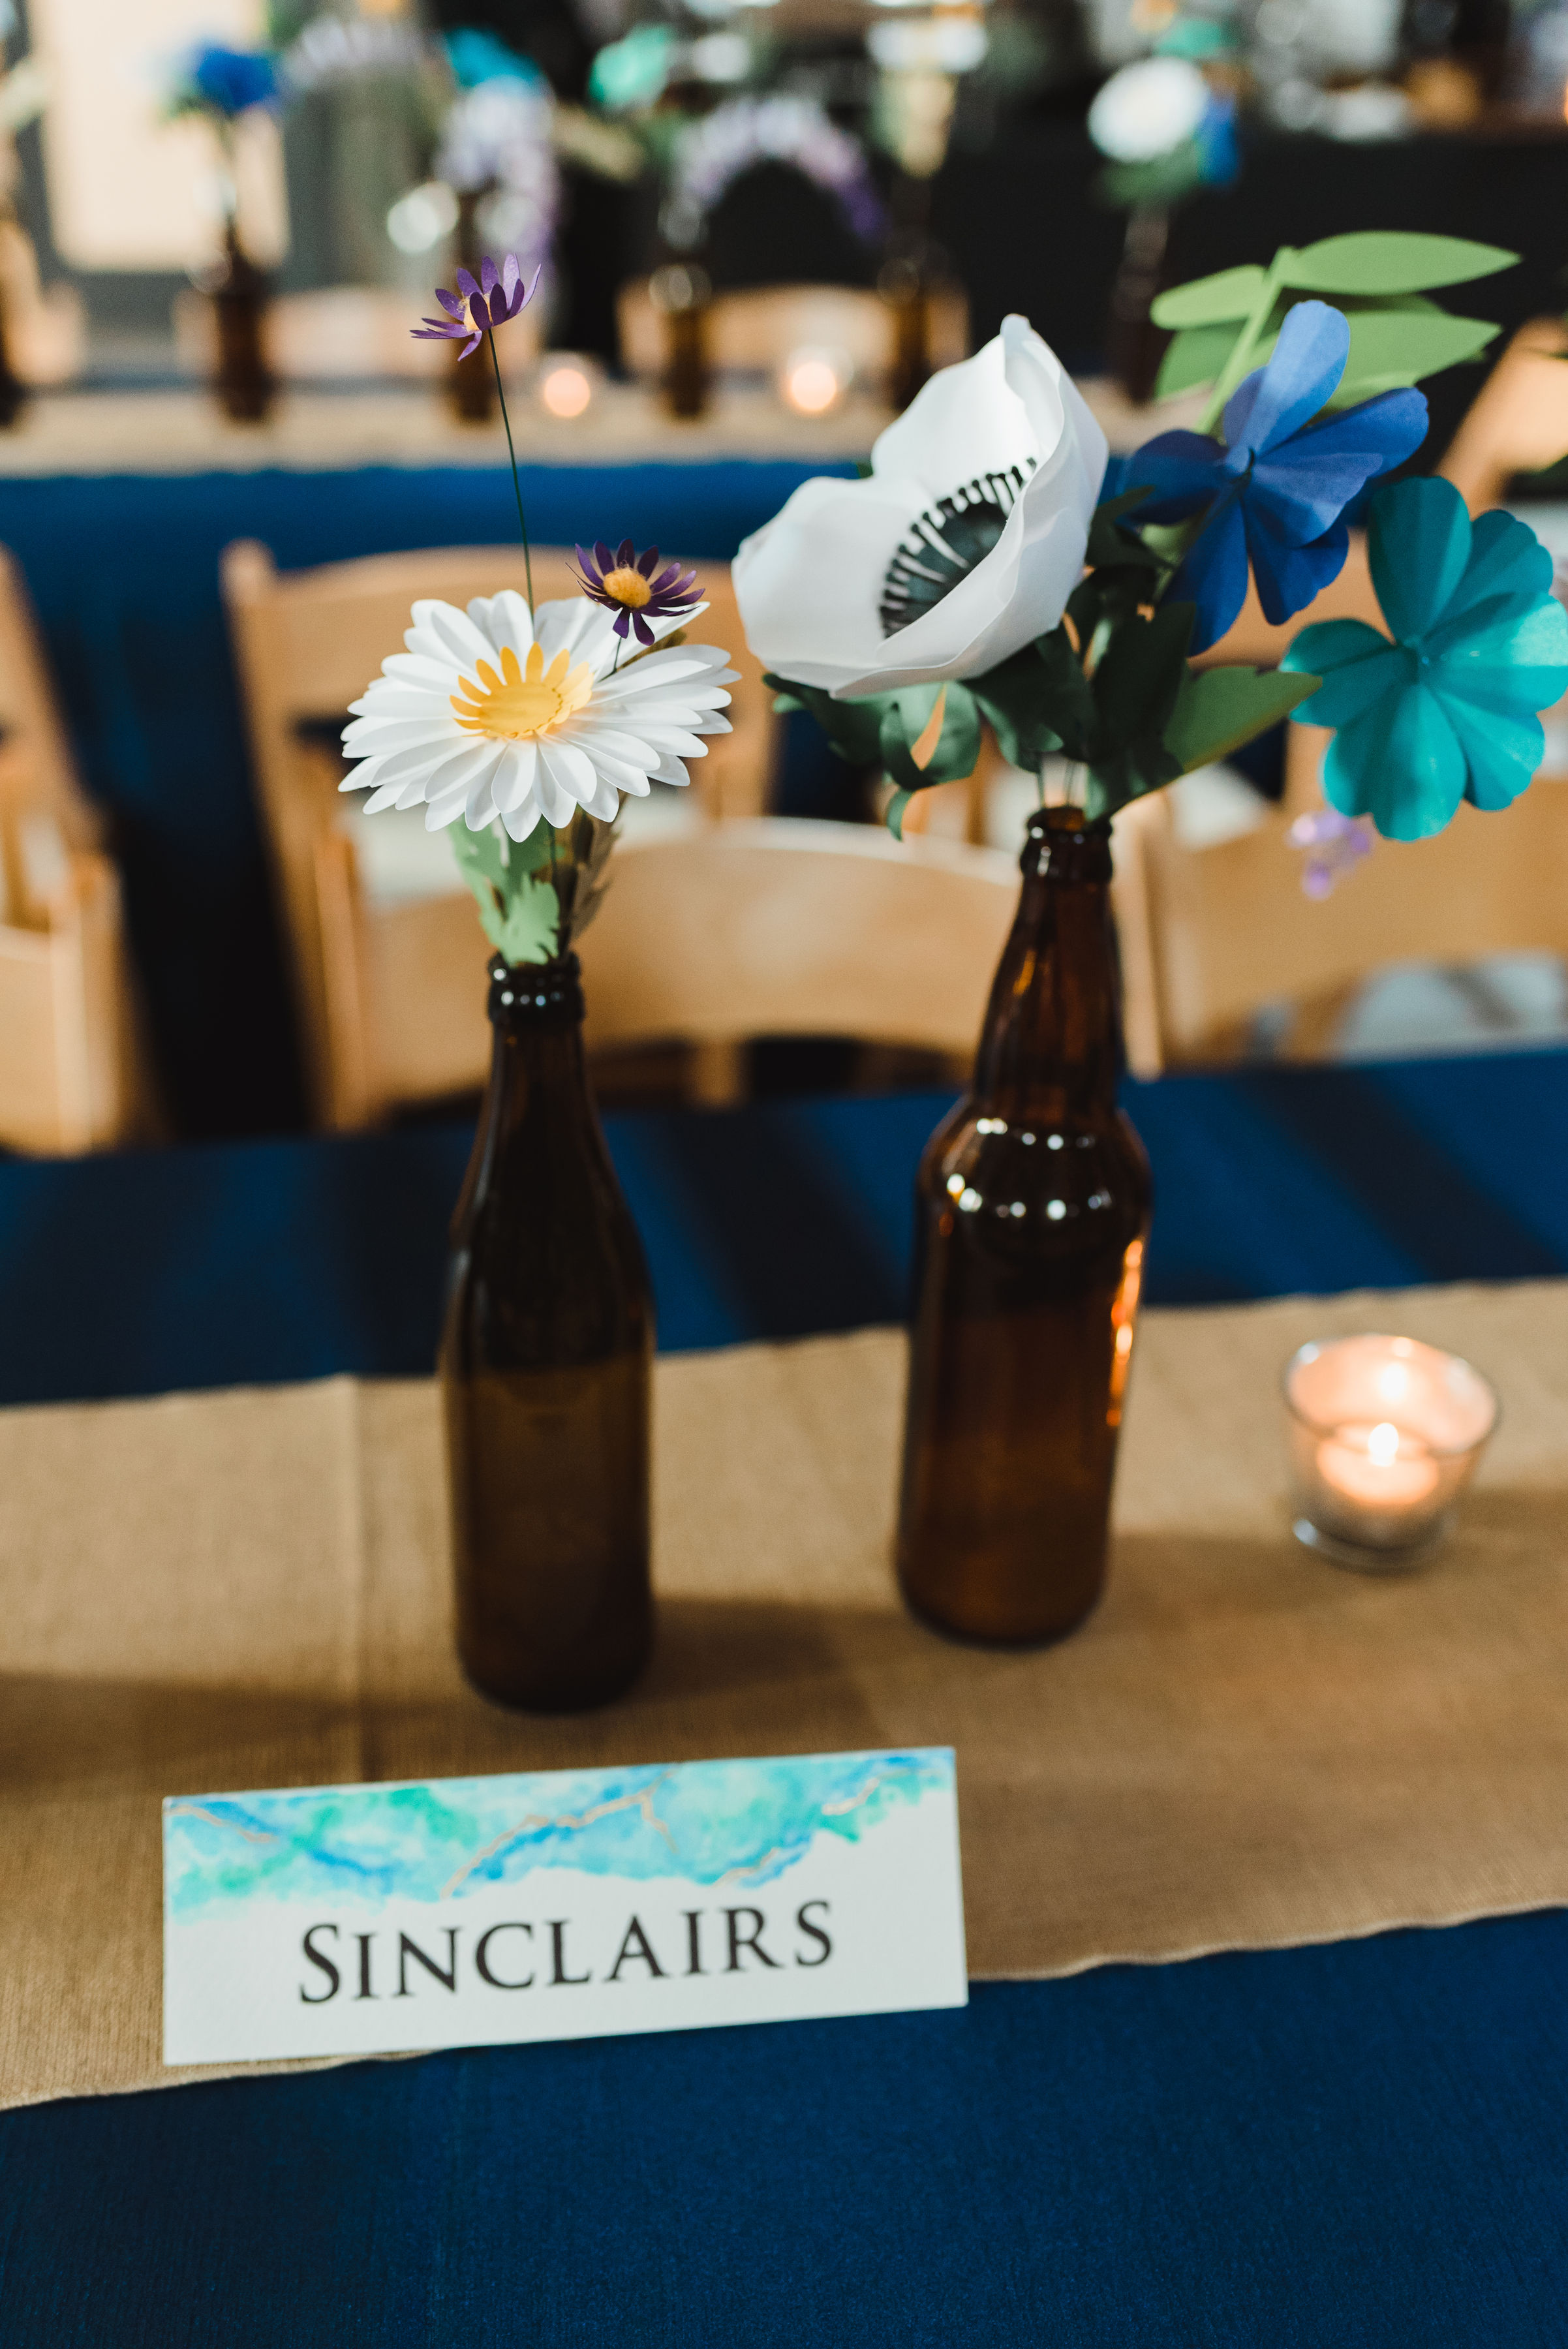 brown beer bottles with flowers placed in them on wedding reception table with a card reading "Sinclairs" in front of them Toronto Junction Craft Brewing wedding